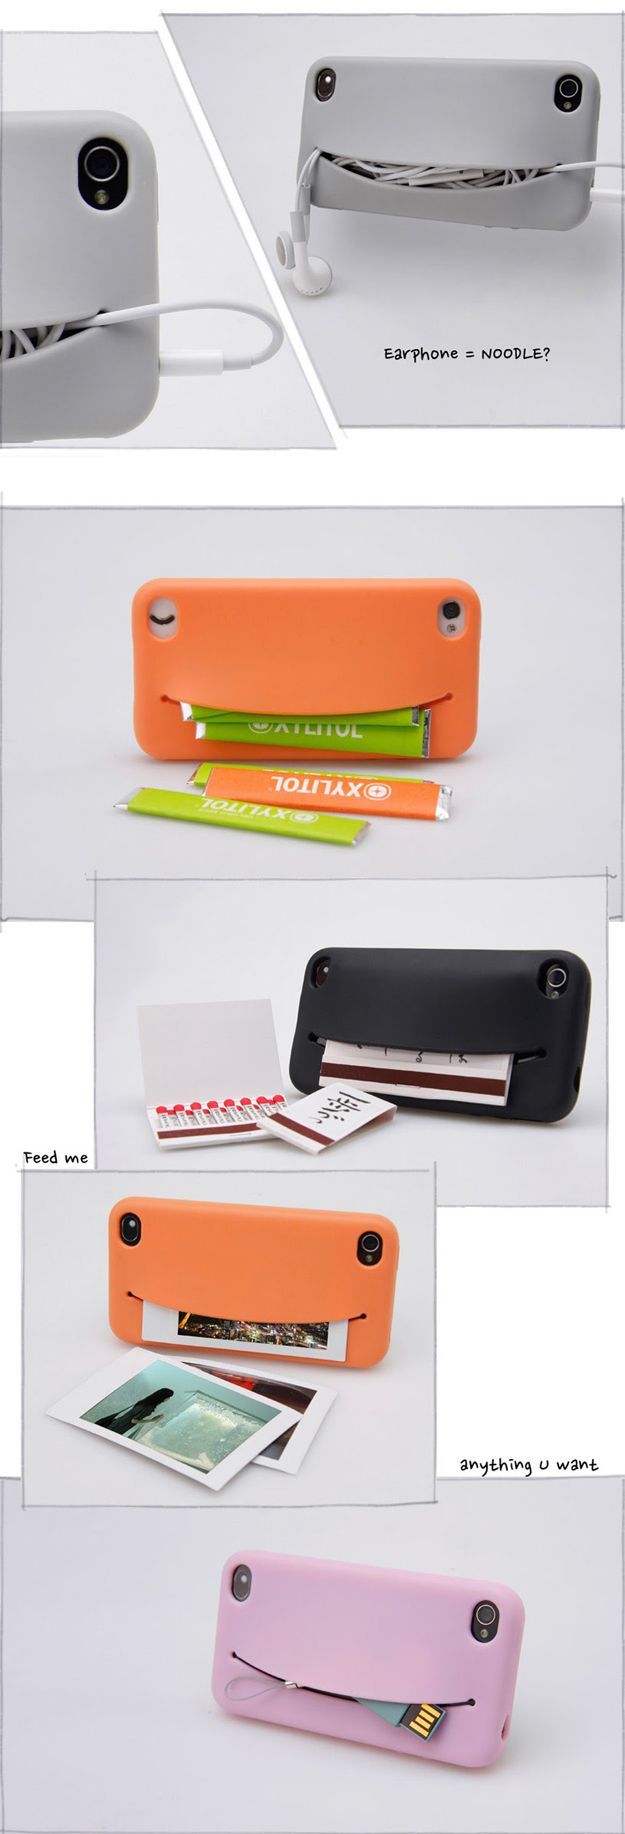 FeedMe: storage iPhone case   Probably not that secure, and would be bulky when